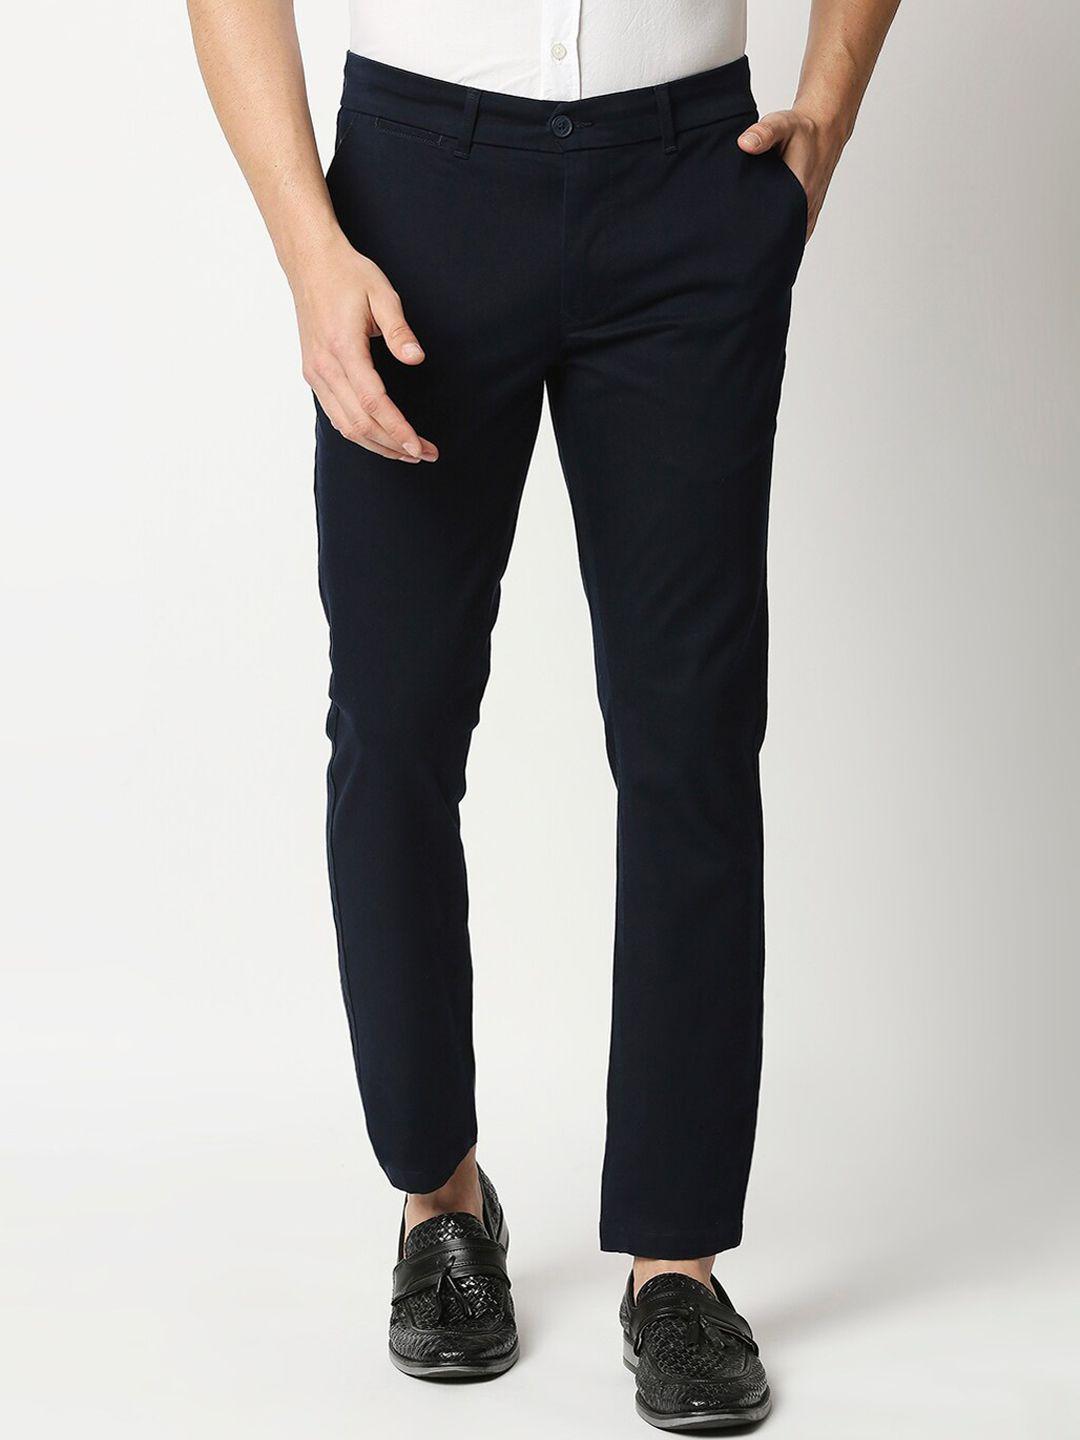 basics-men-navy-blue-tapered-fit-trousers